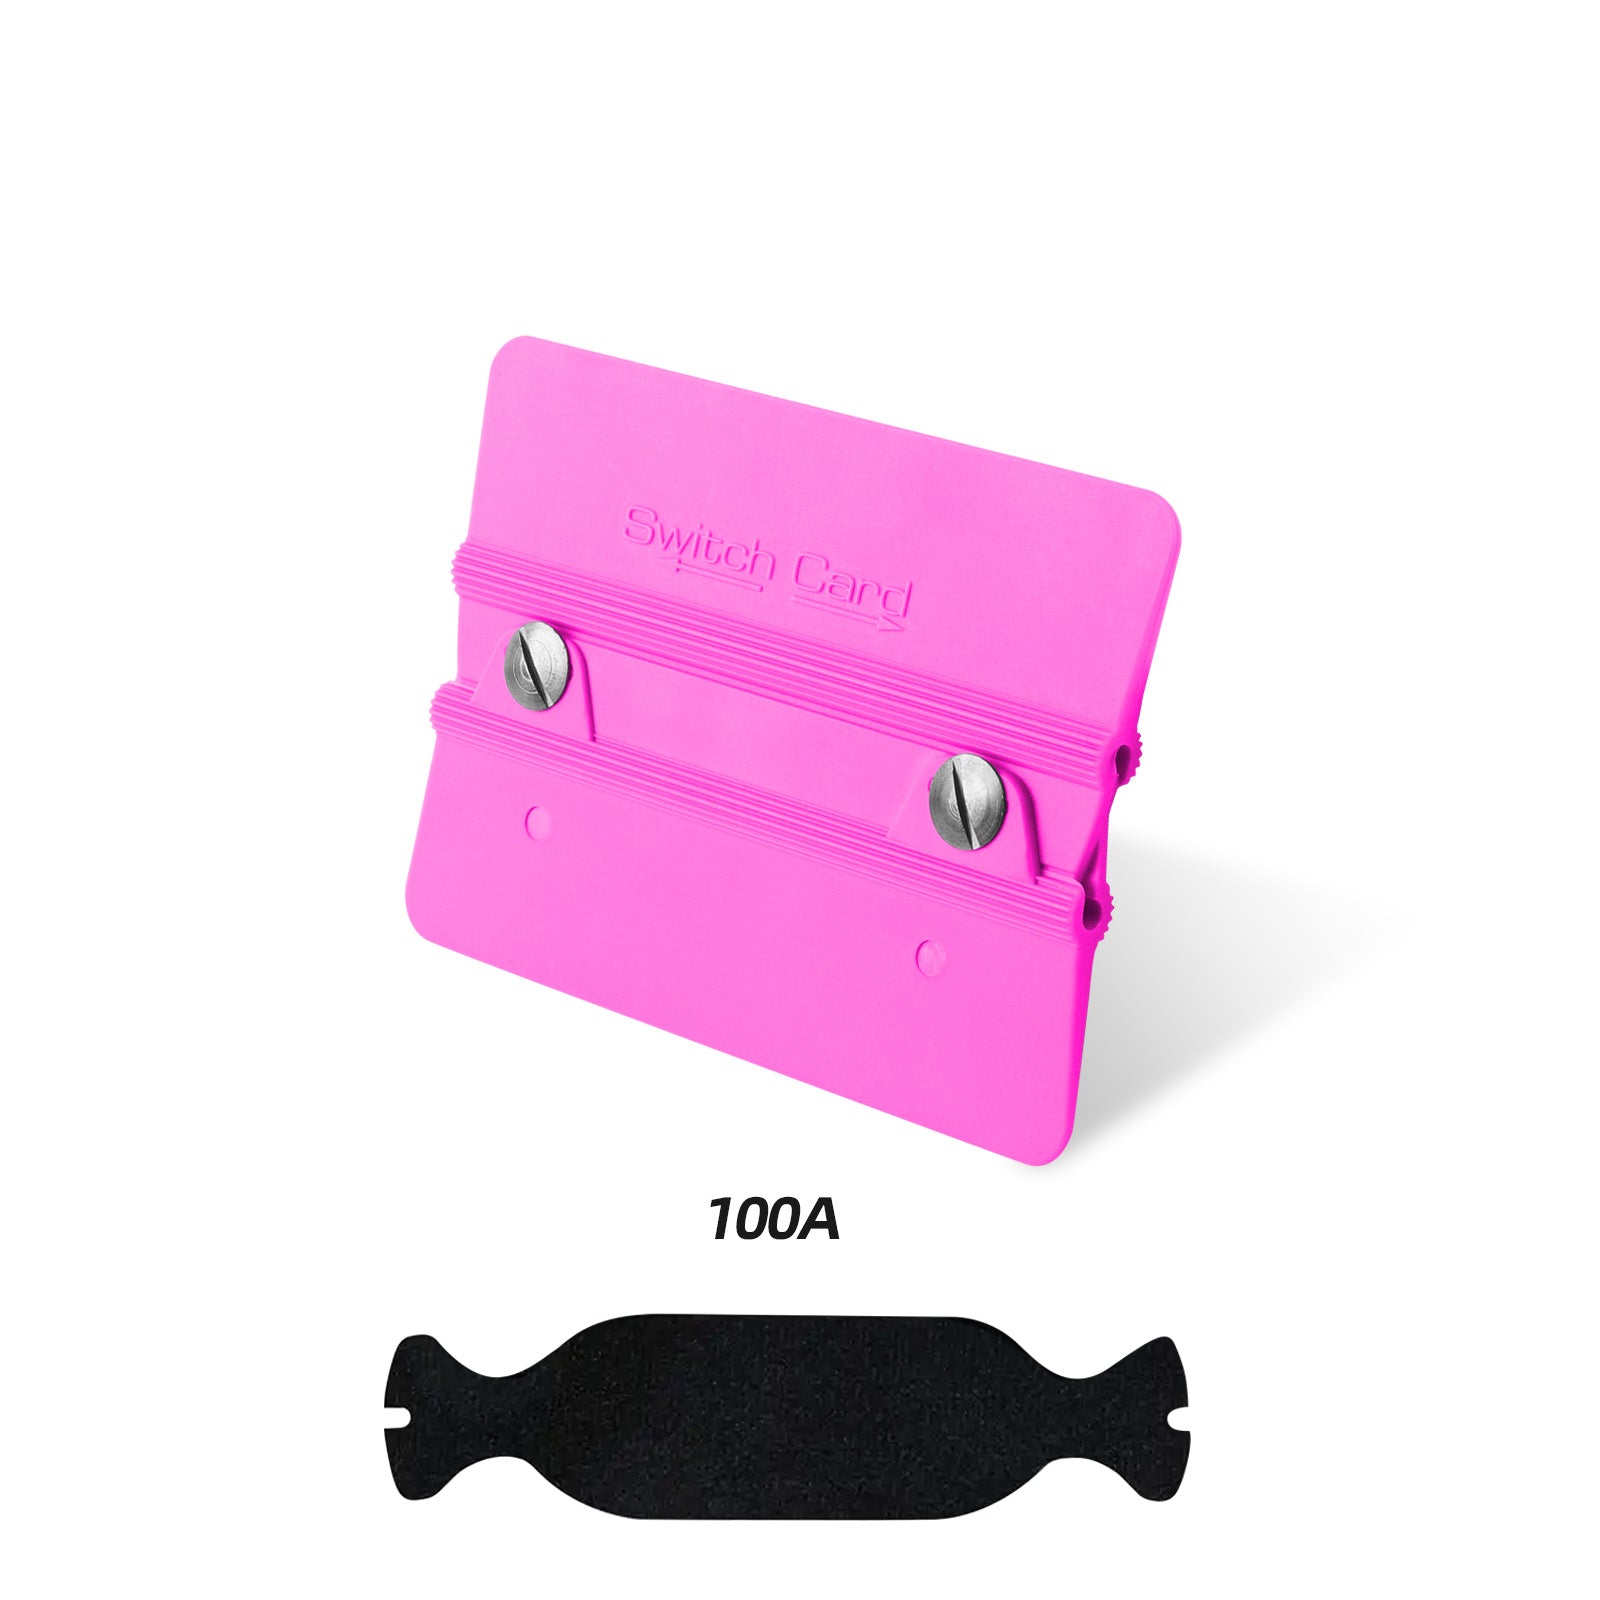 Precision edge of Pink Switch Squeegee B for flawless car wrap application.